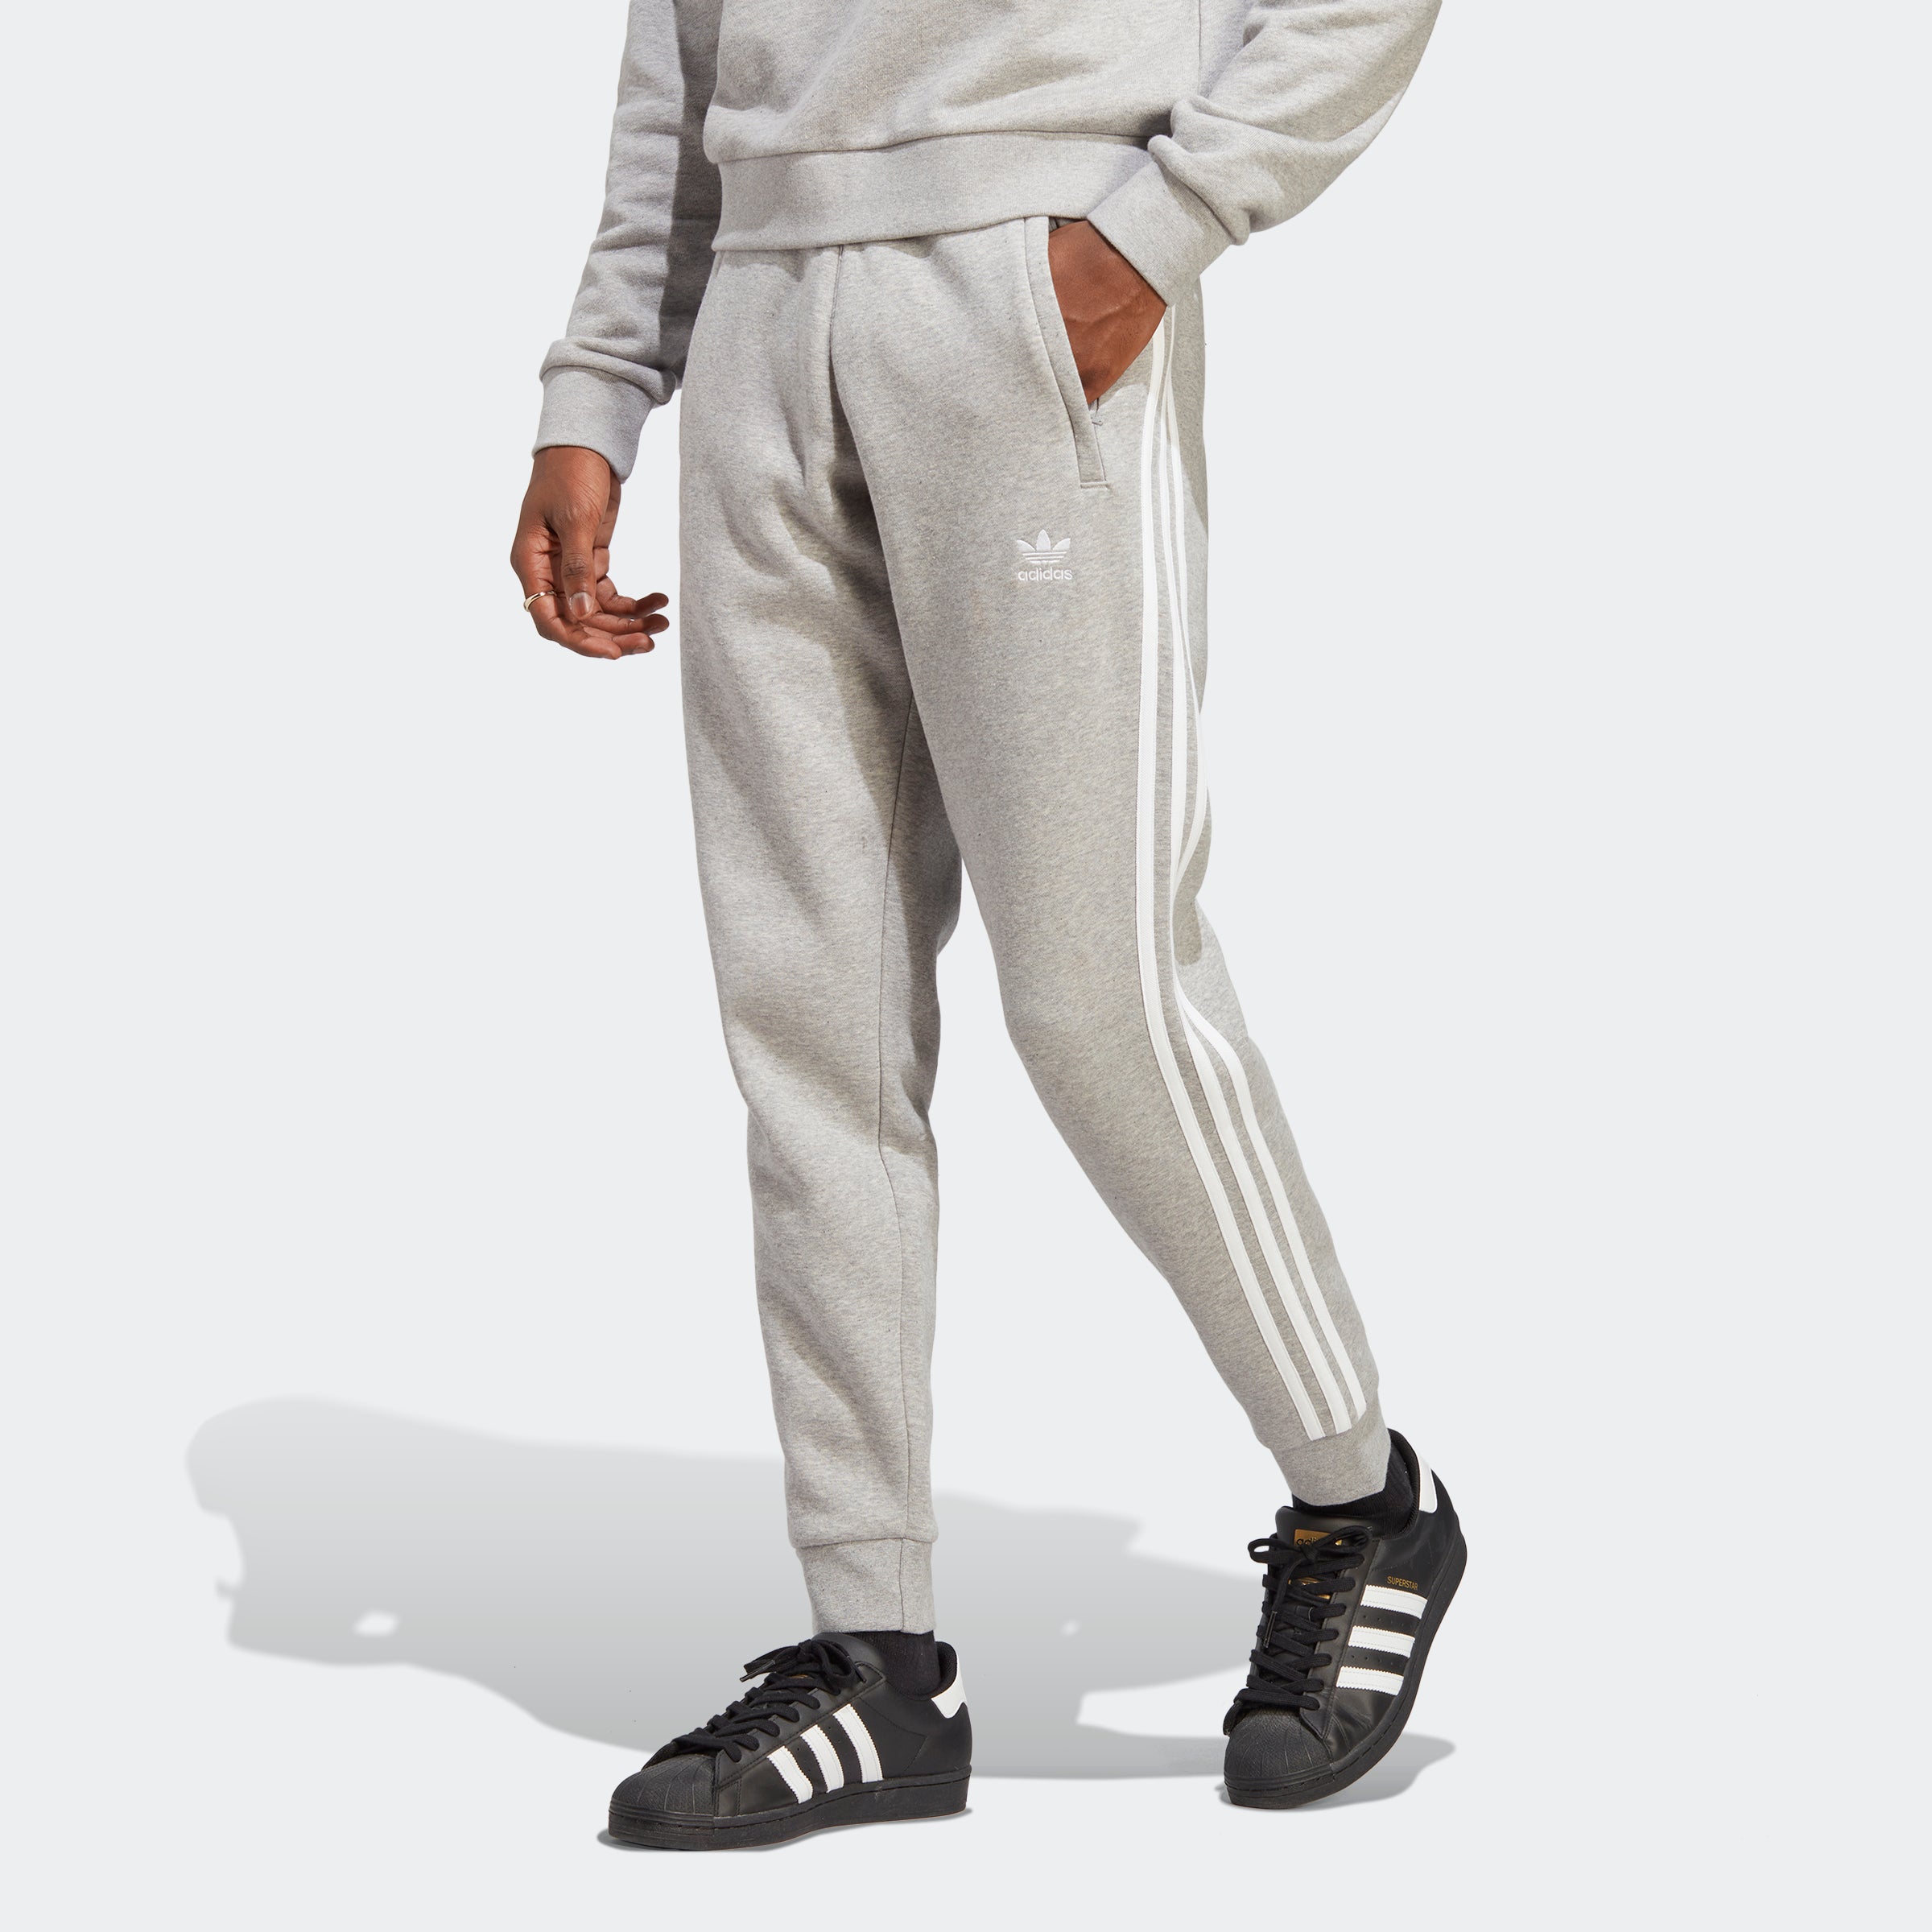 Athleisure Outfit Idea: Adidas Track Pants